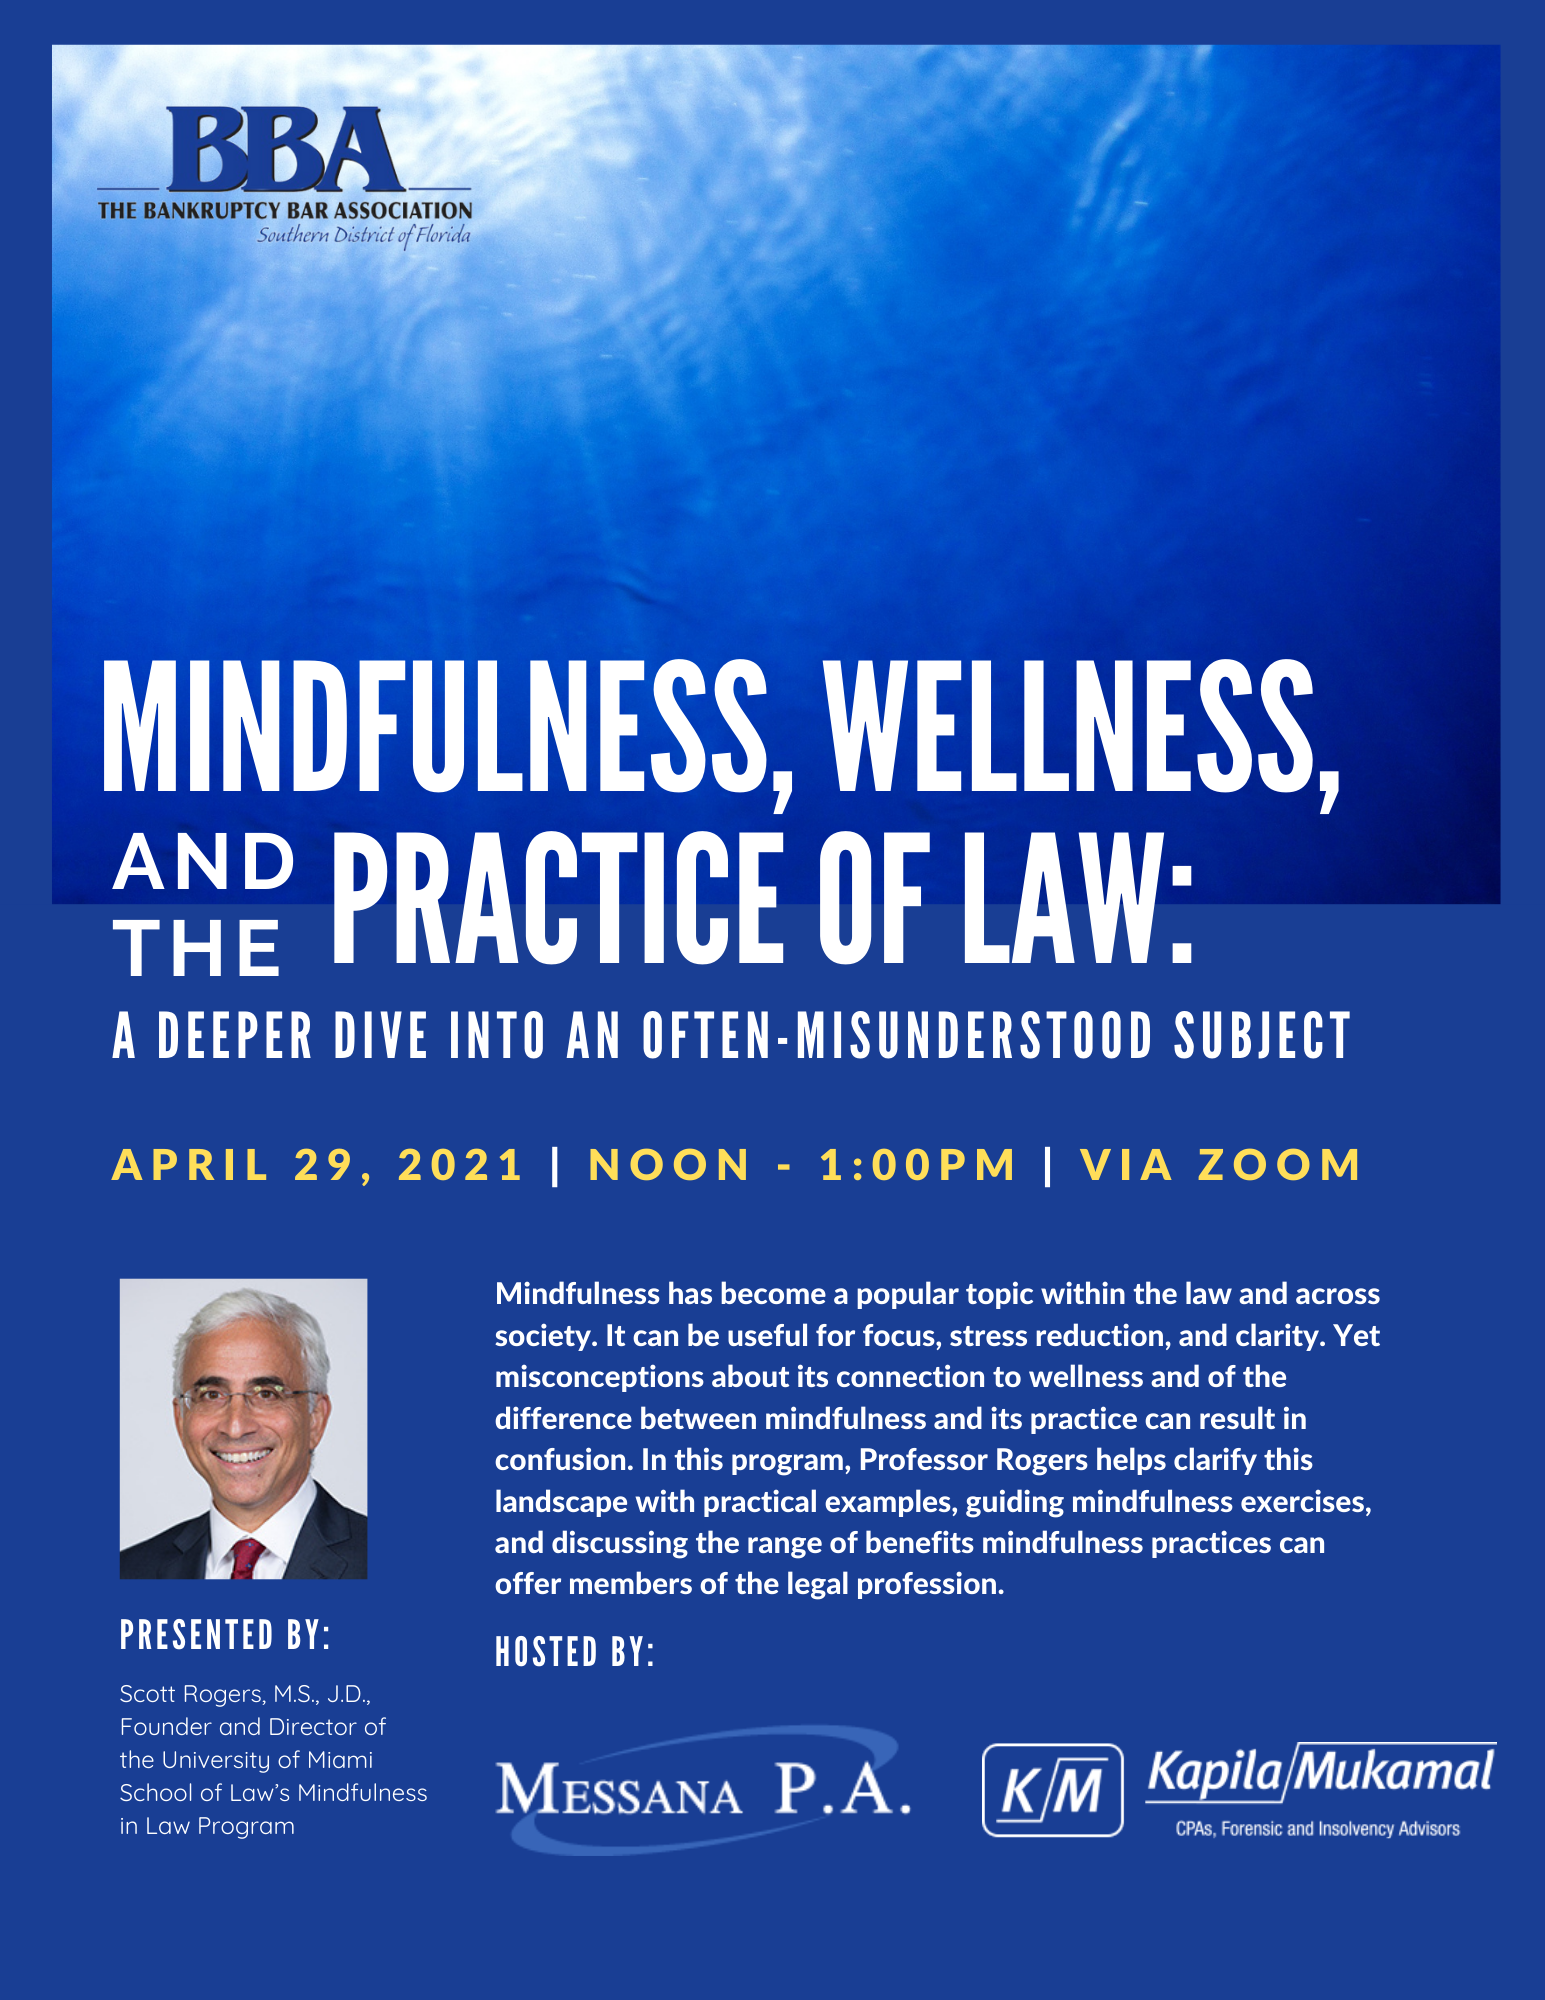 Mindfullness, Wellness, and the Practice of Law: A Deeper Dive Into an Often-Misunderstood Subject